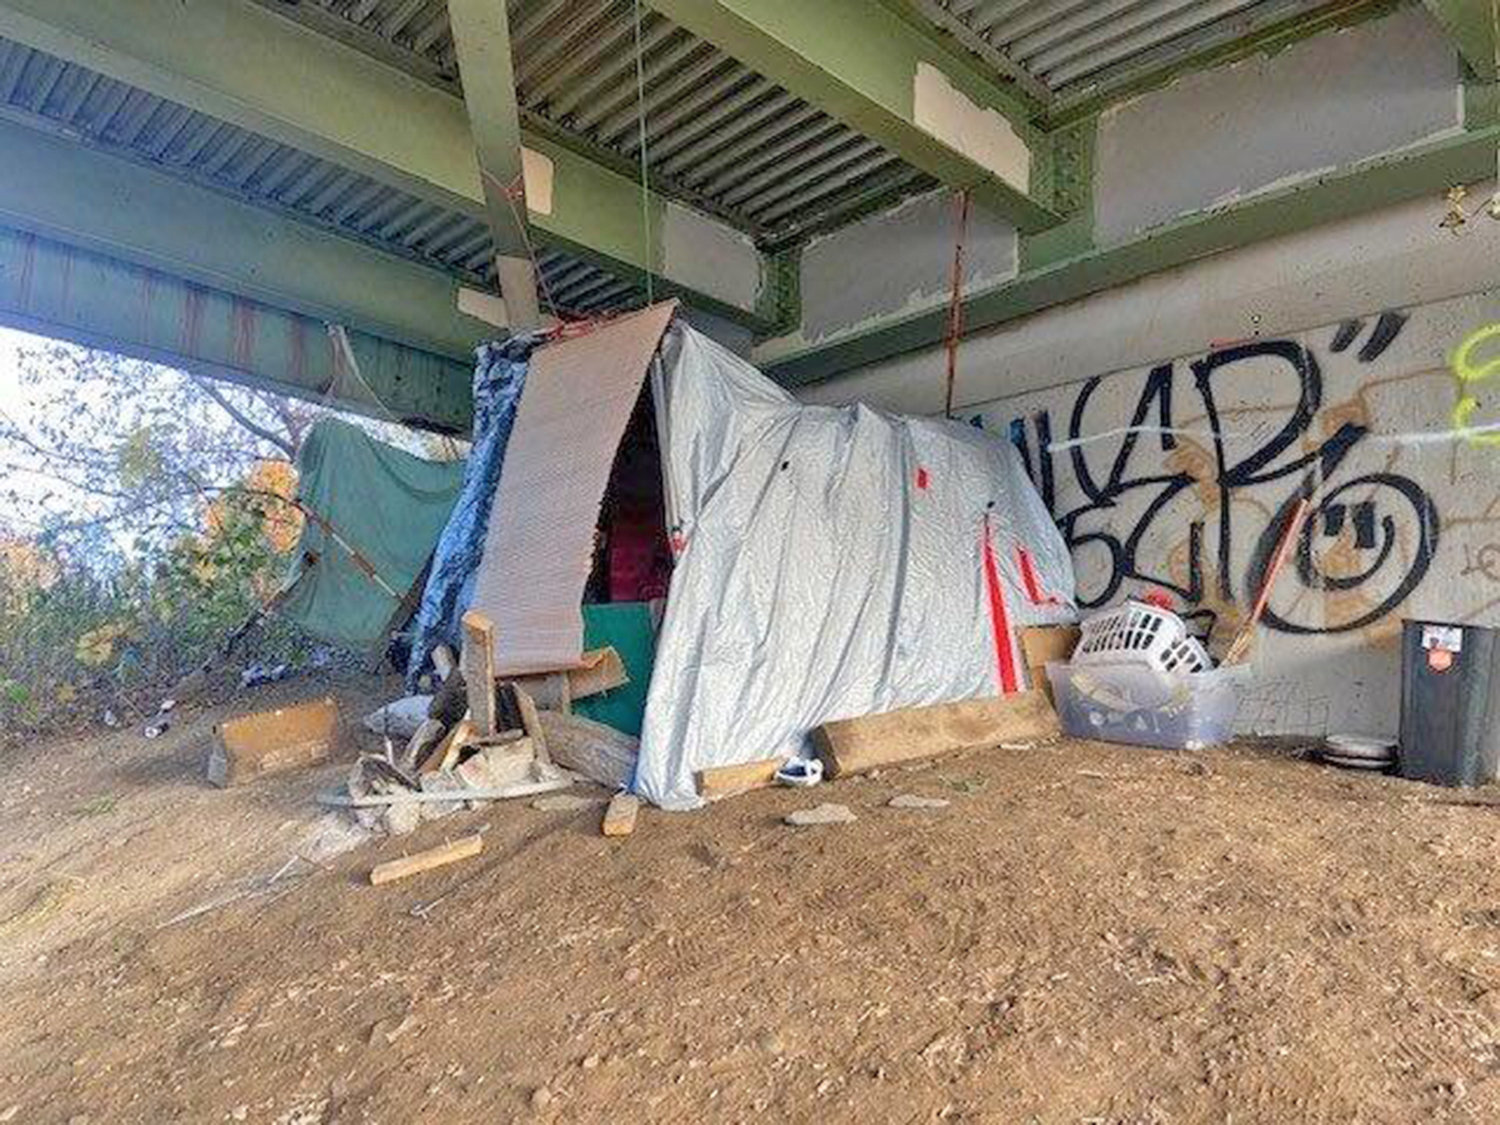 A homeless tent built beneath the South James Street bridge in Rome, which was recently taken down by the Rome Police Department. It was one of several officers have dealt with in recent weeks, officials said.